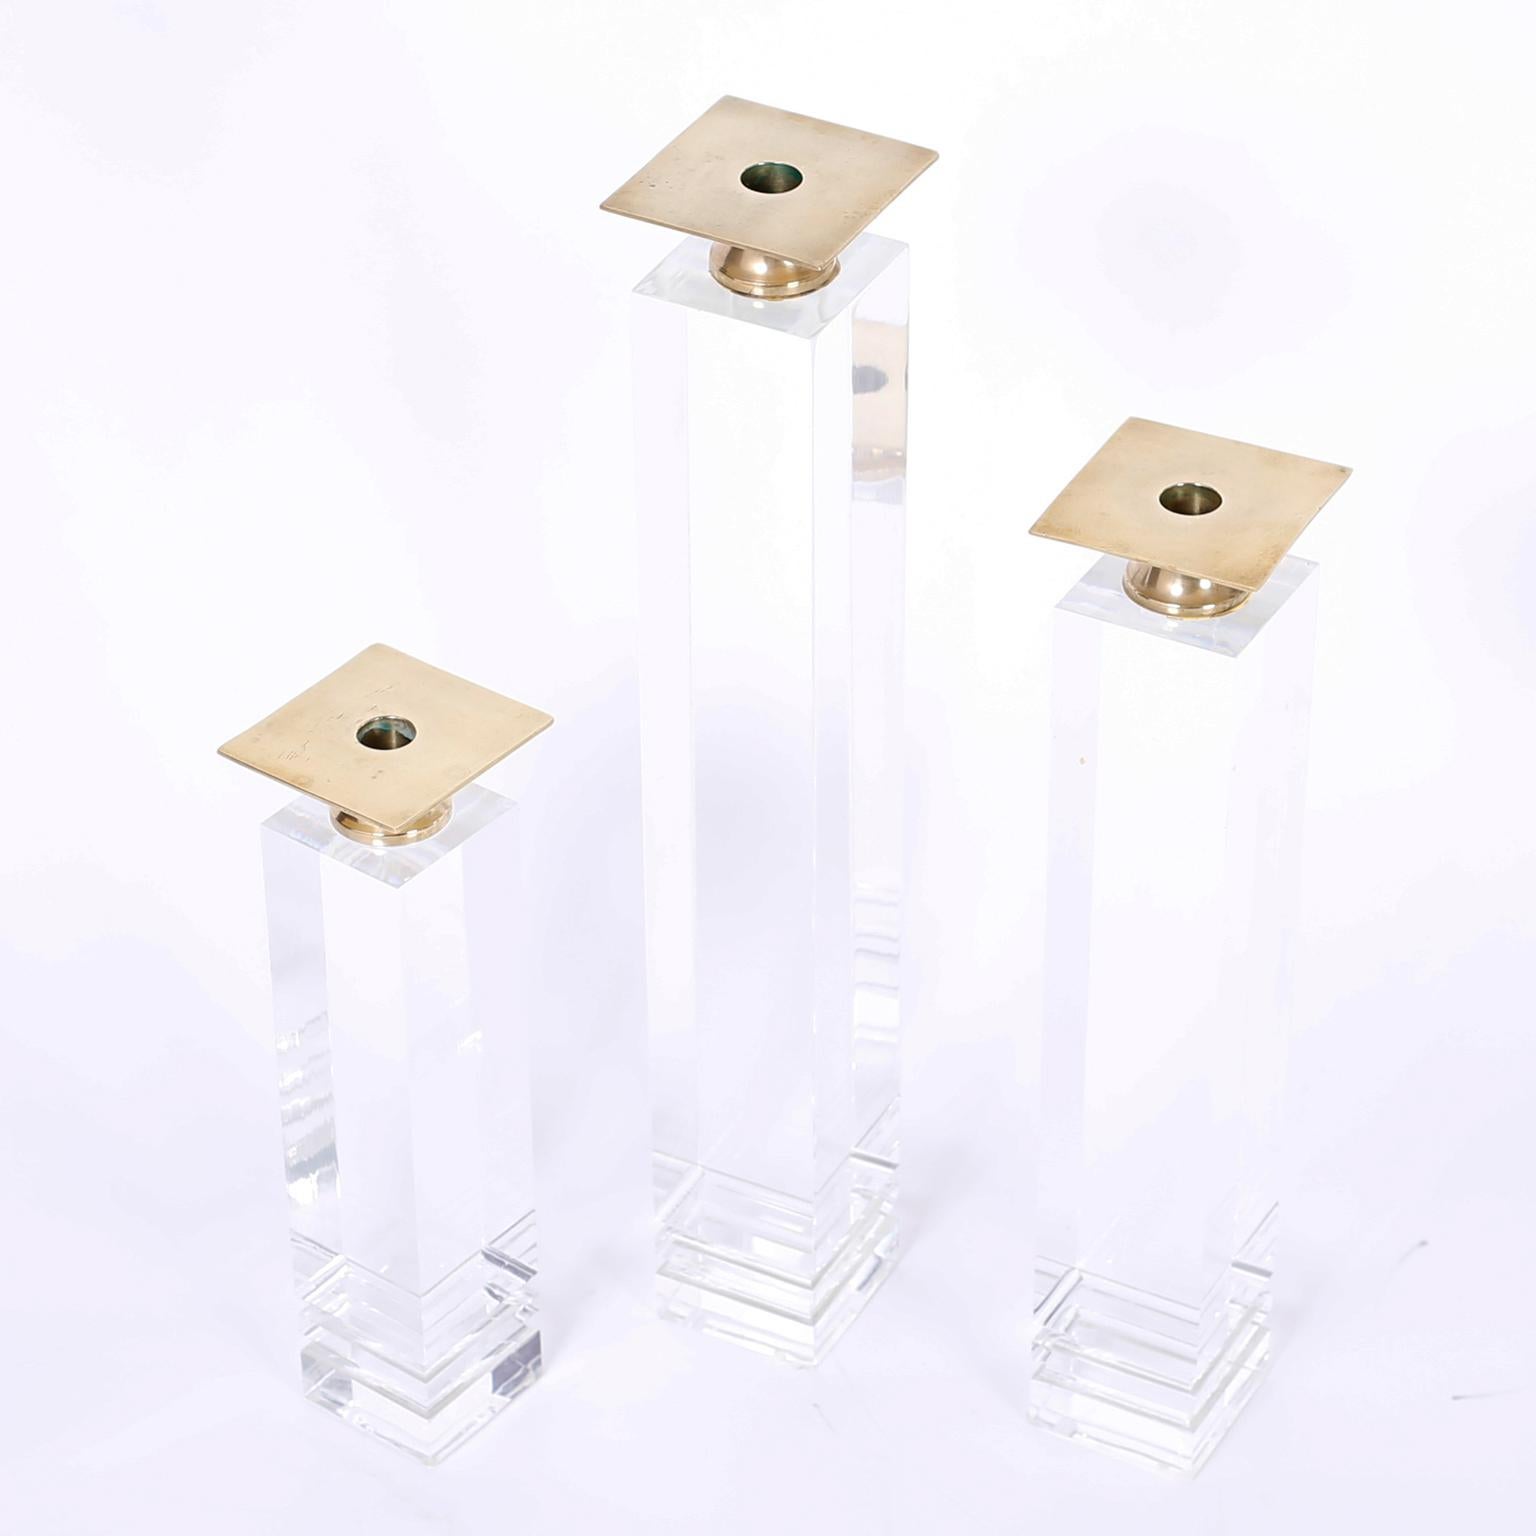 Set of three midcentury Lucite candlesticks with polished brass candle cups on acrylic bases with architectural appeal.
Measures: SM- H 13, W 3.5, D 3.5, MED- H 17, W 3.5, D 3.5, LG- H 21, W 3.5, D 3.5.